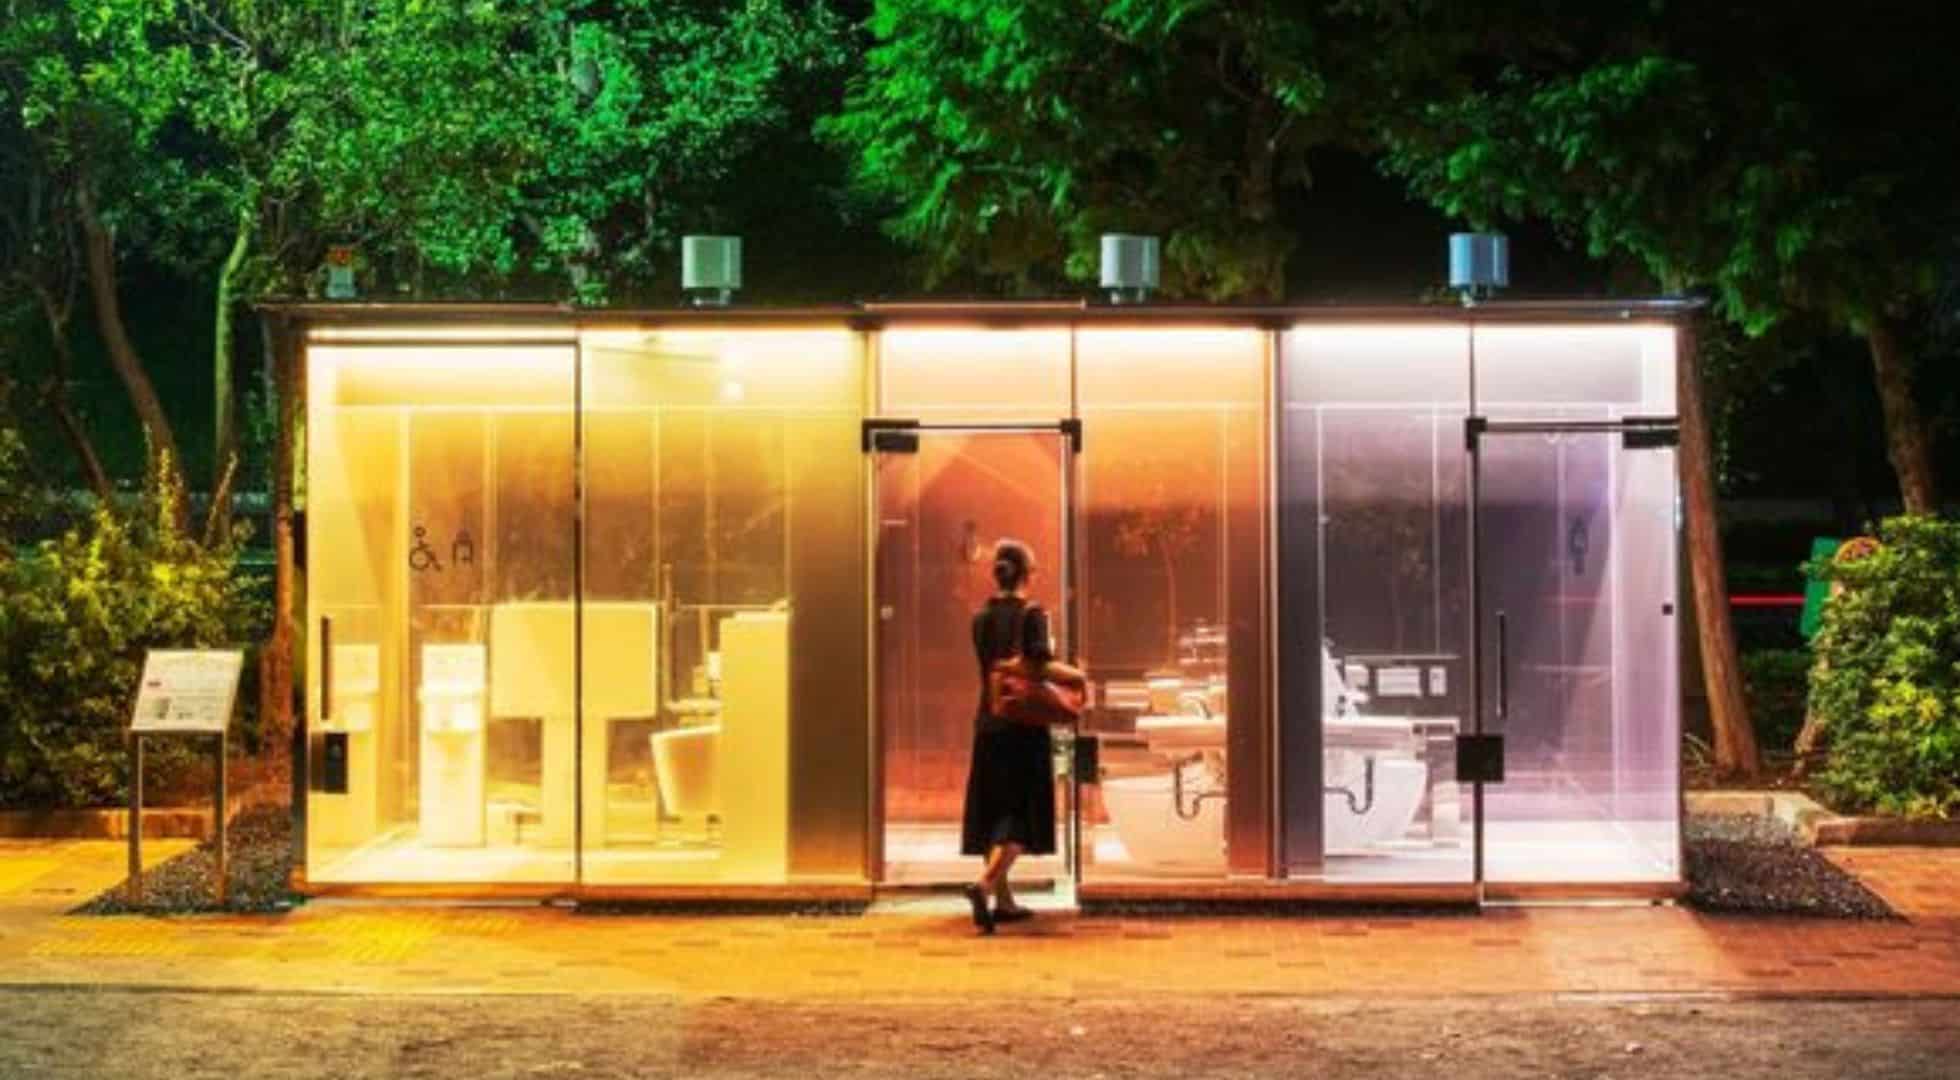 Take in the view of Tokyo at night from a public toilet.